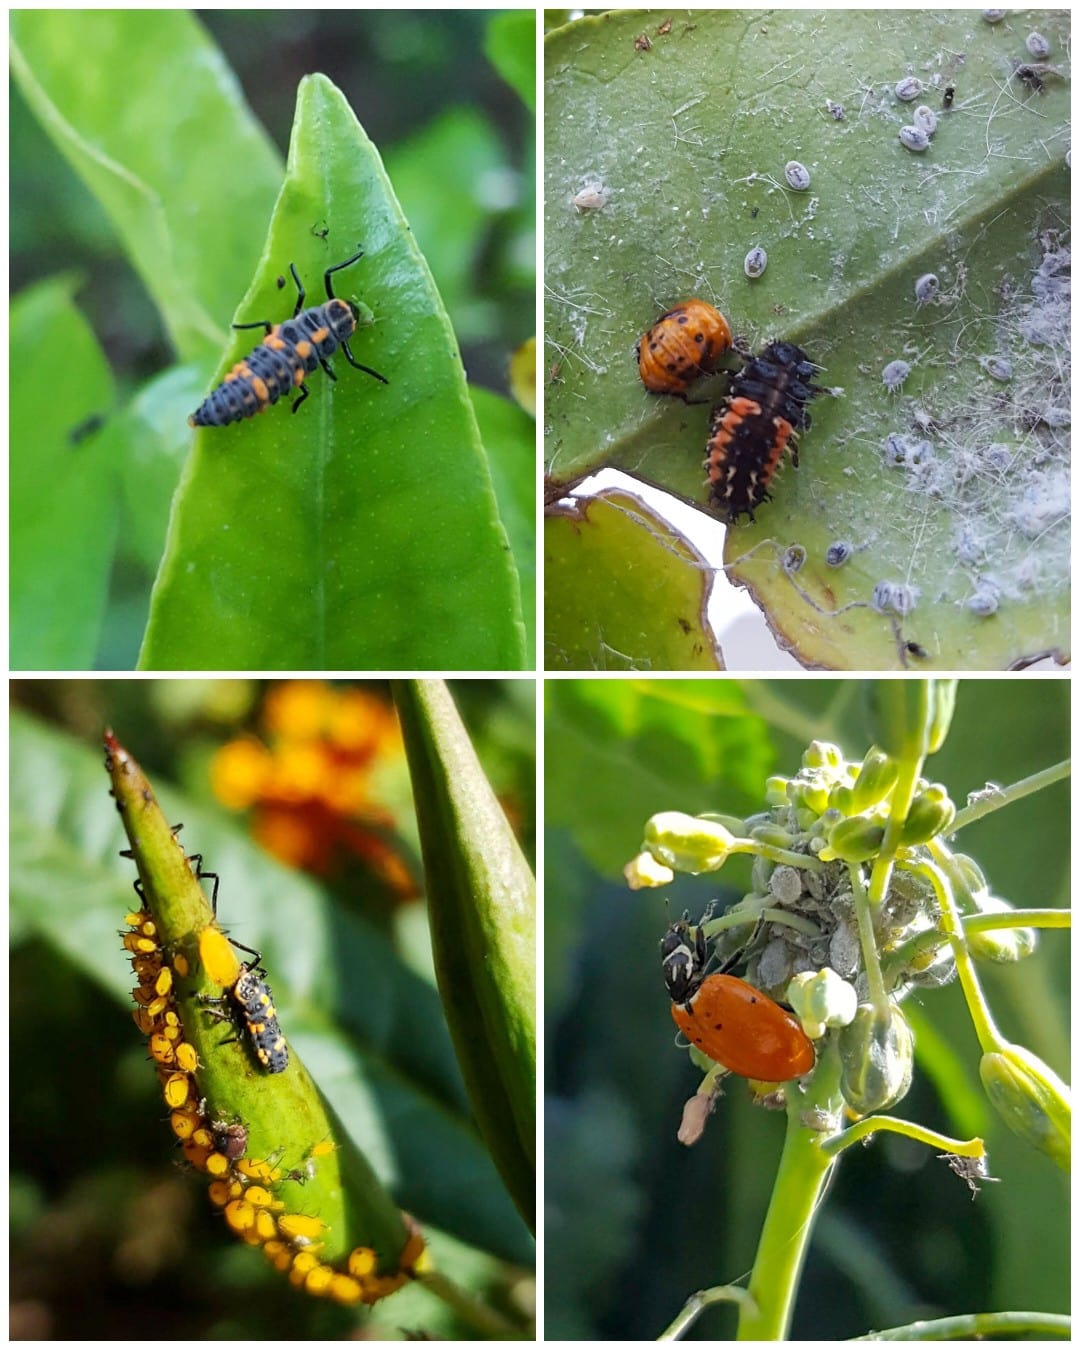 A four part image collage, the first image show a lady bug larvae on the tip of a plant leaf, the second image shows fuzzy mealybugs and aphids on the bottom of a leaf, with a black and orange ladybug larvae eating them.The third image shows a ladybug larvae eating orange aphids (garden pests) on our milkweed, the fourth image shows an adult lady bug eating grey aphids on flowering kale.